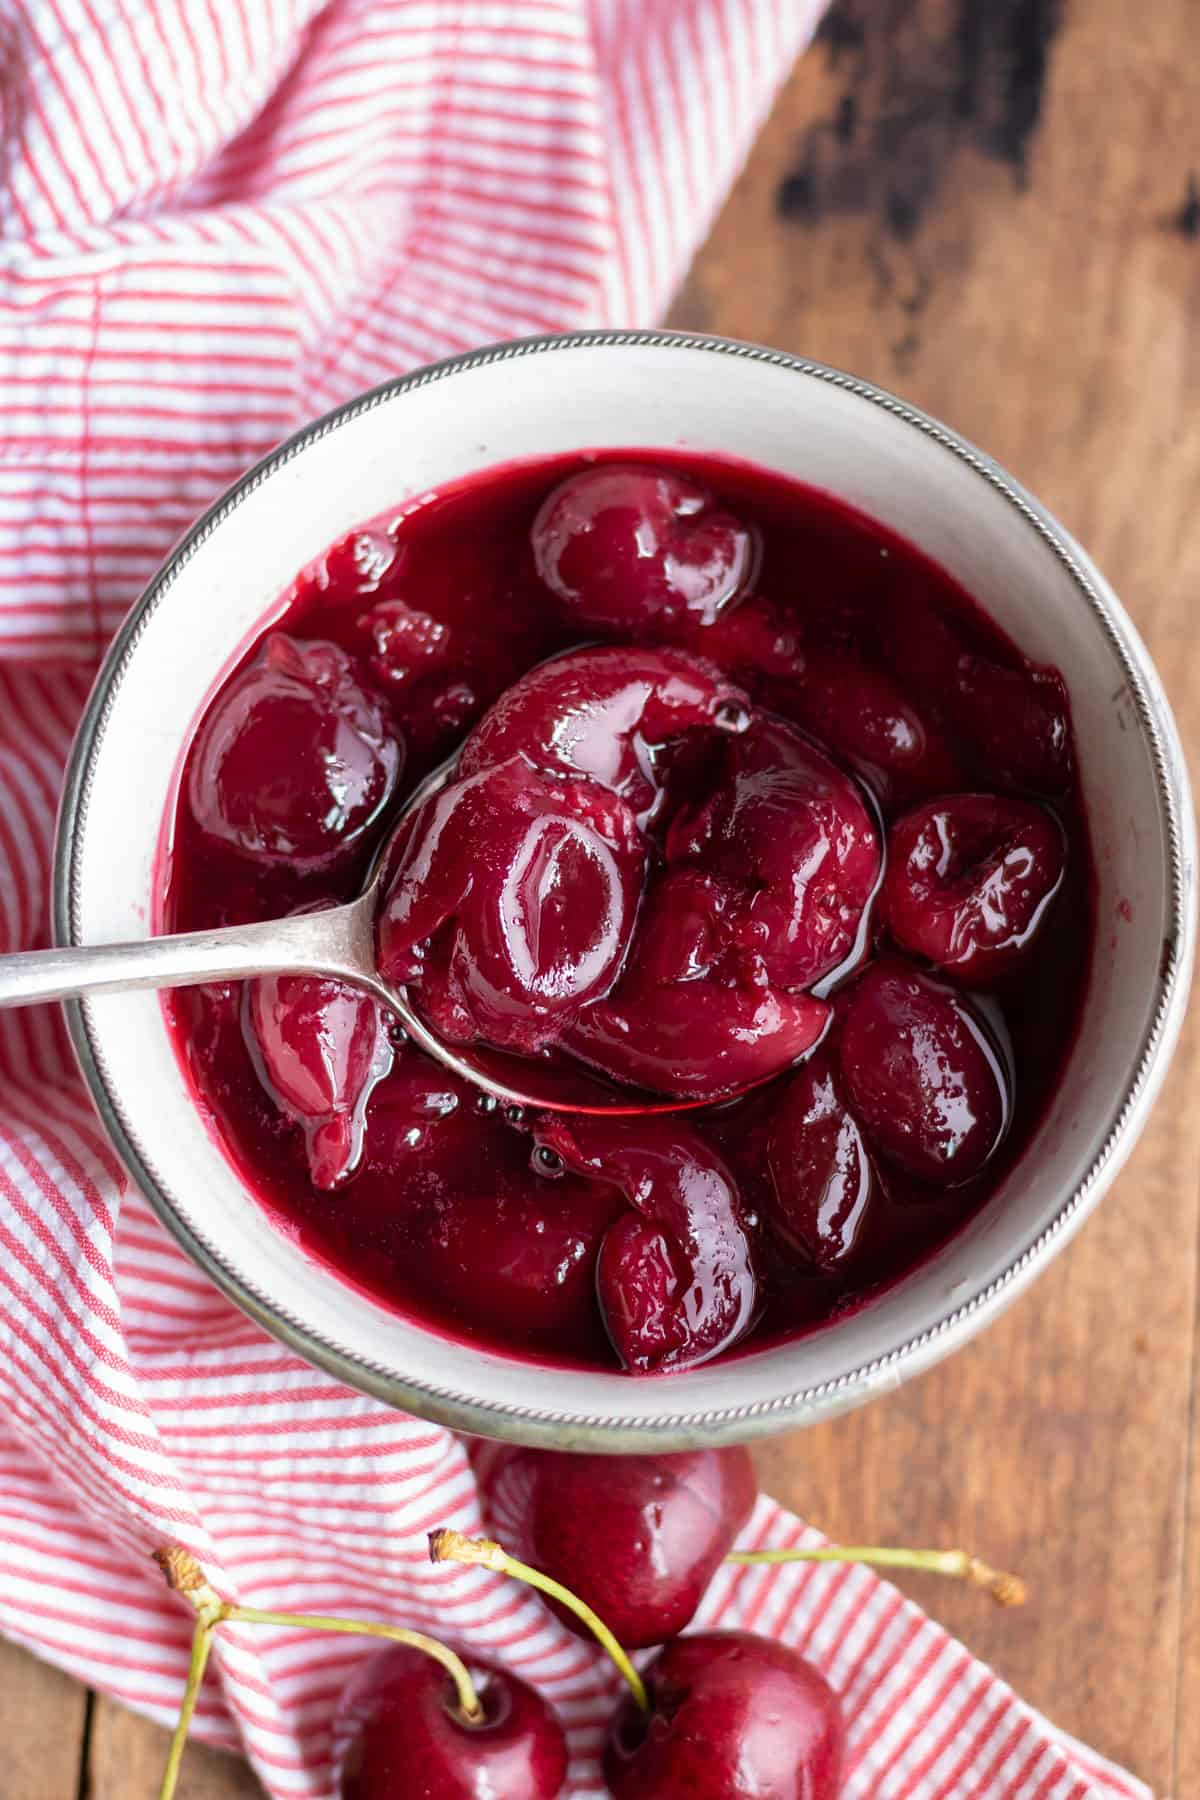 Dish of cherry compote with a spoon.